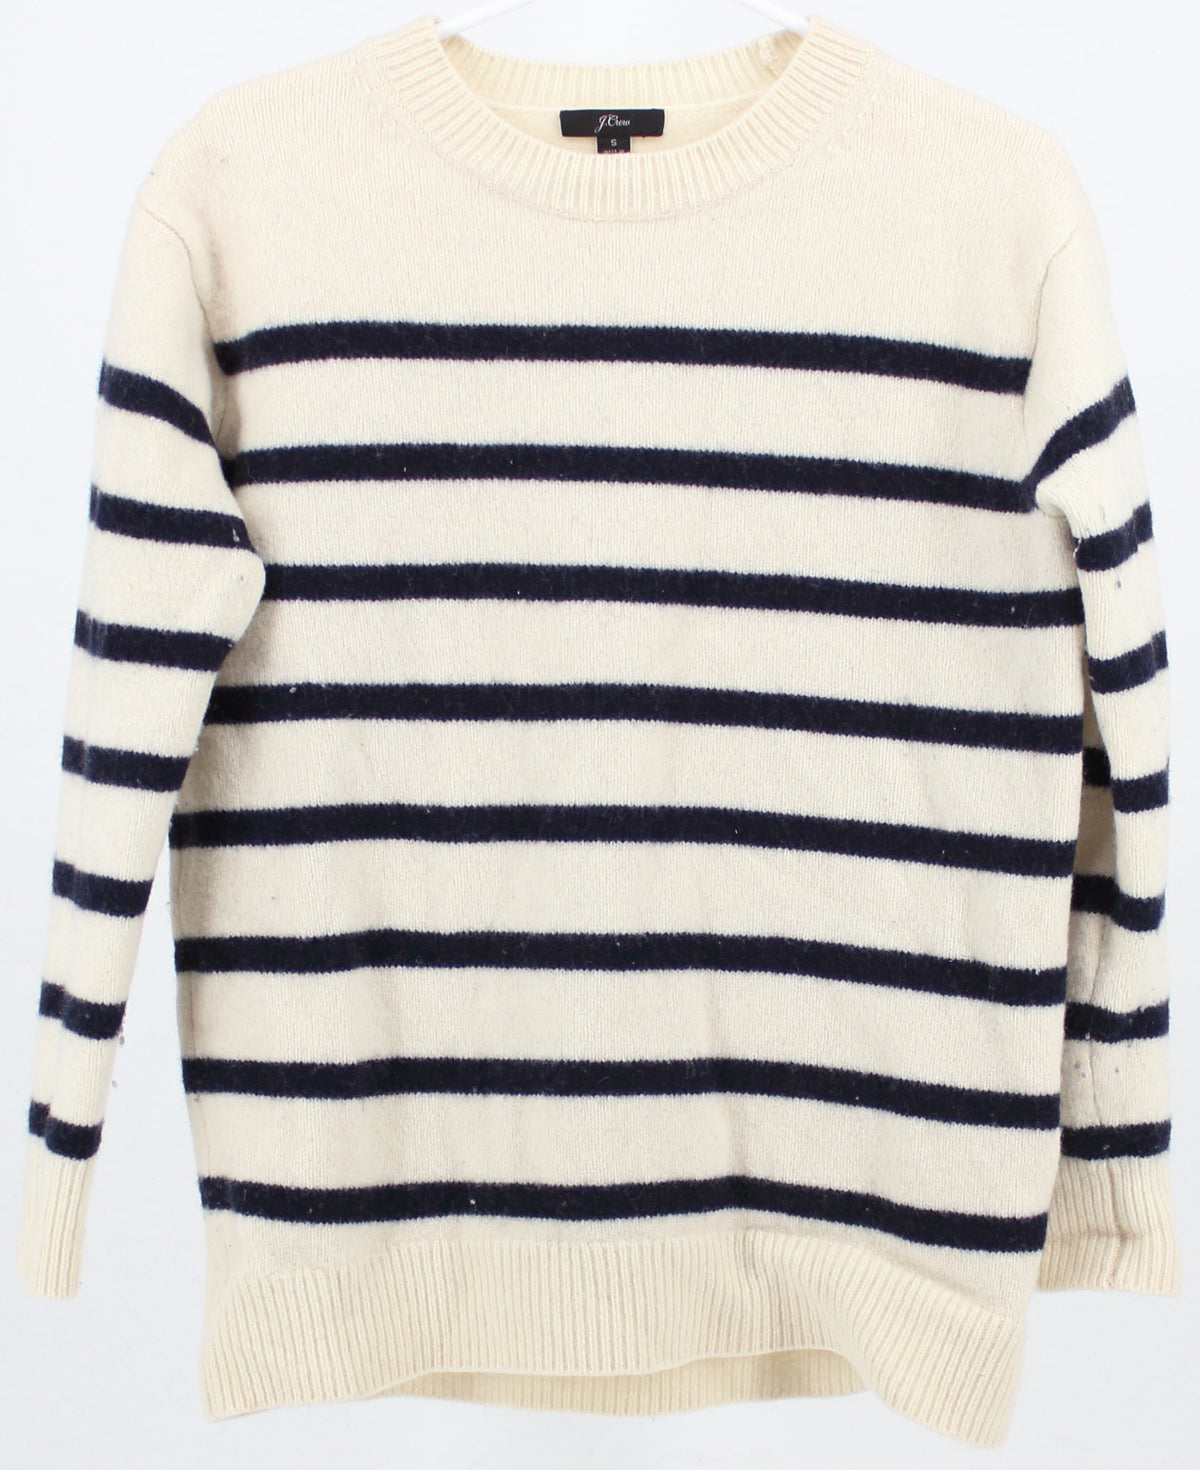 J Crew Off White and Navy Blue Striped Sweater